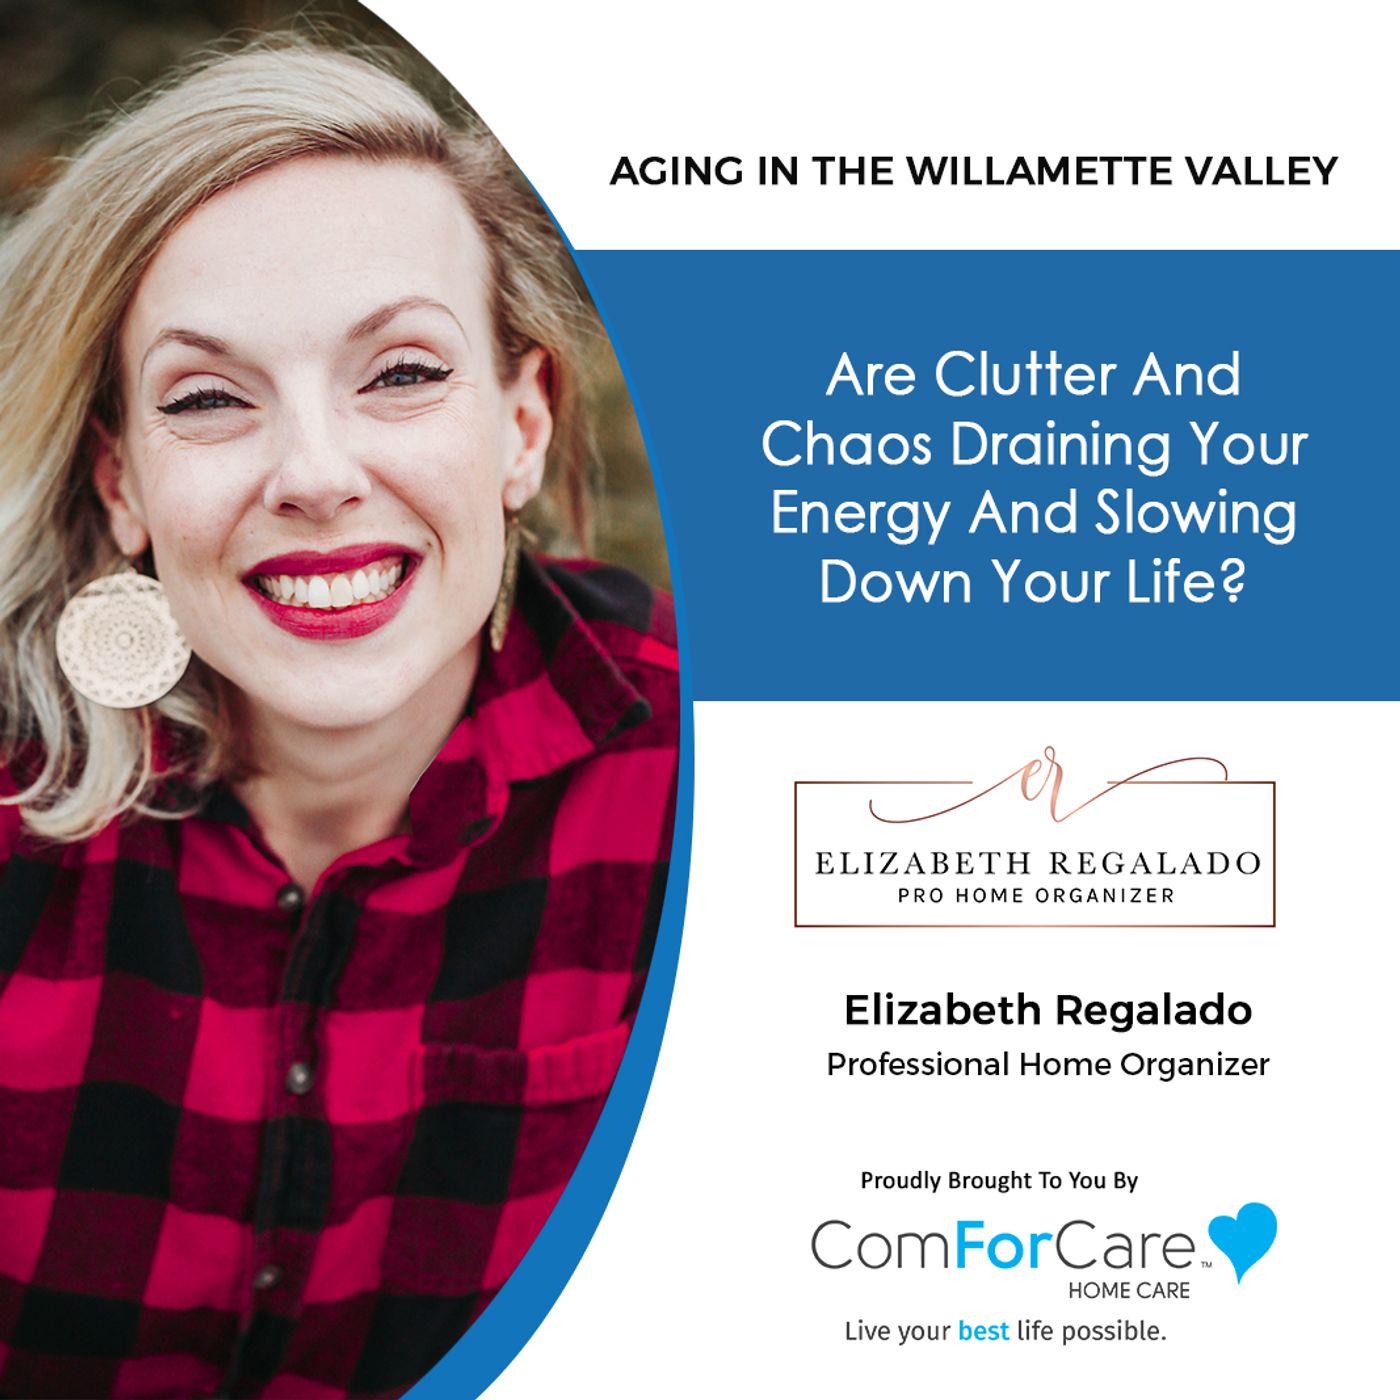 10/15/22: Elizabeth Regalado | Are clutter and chaos draining your energy and slowing down your life?